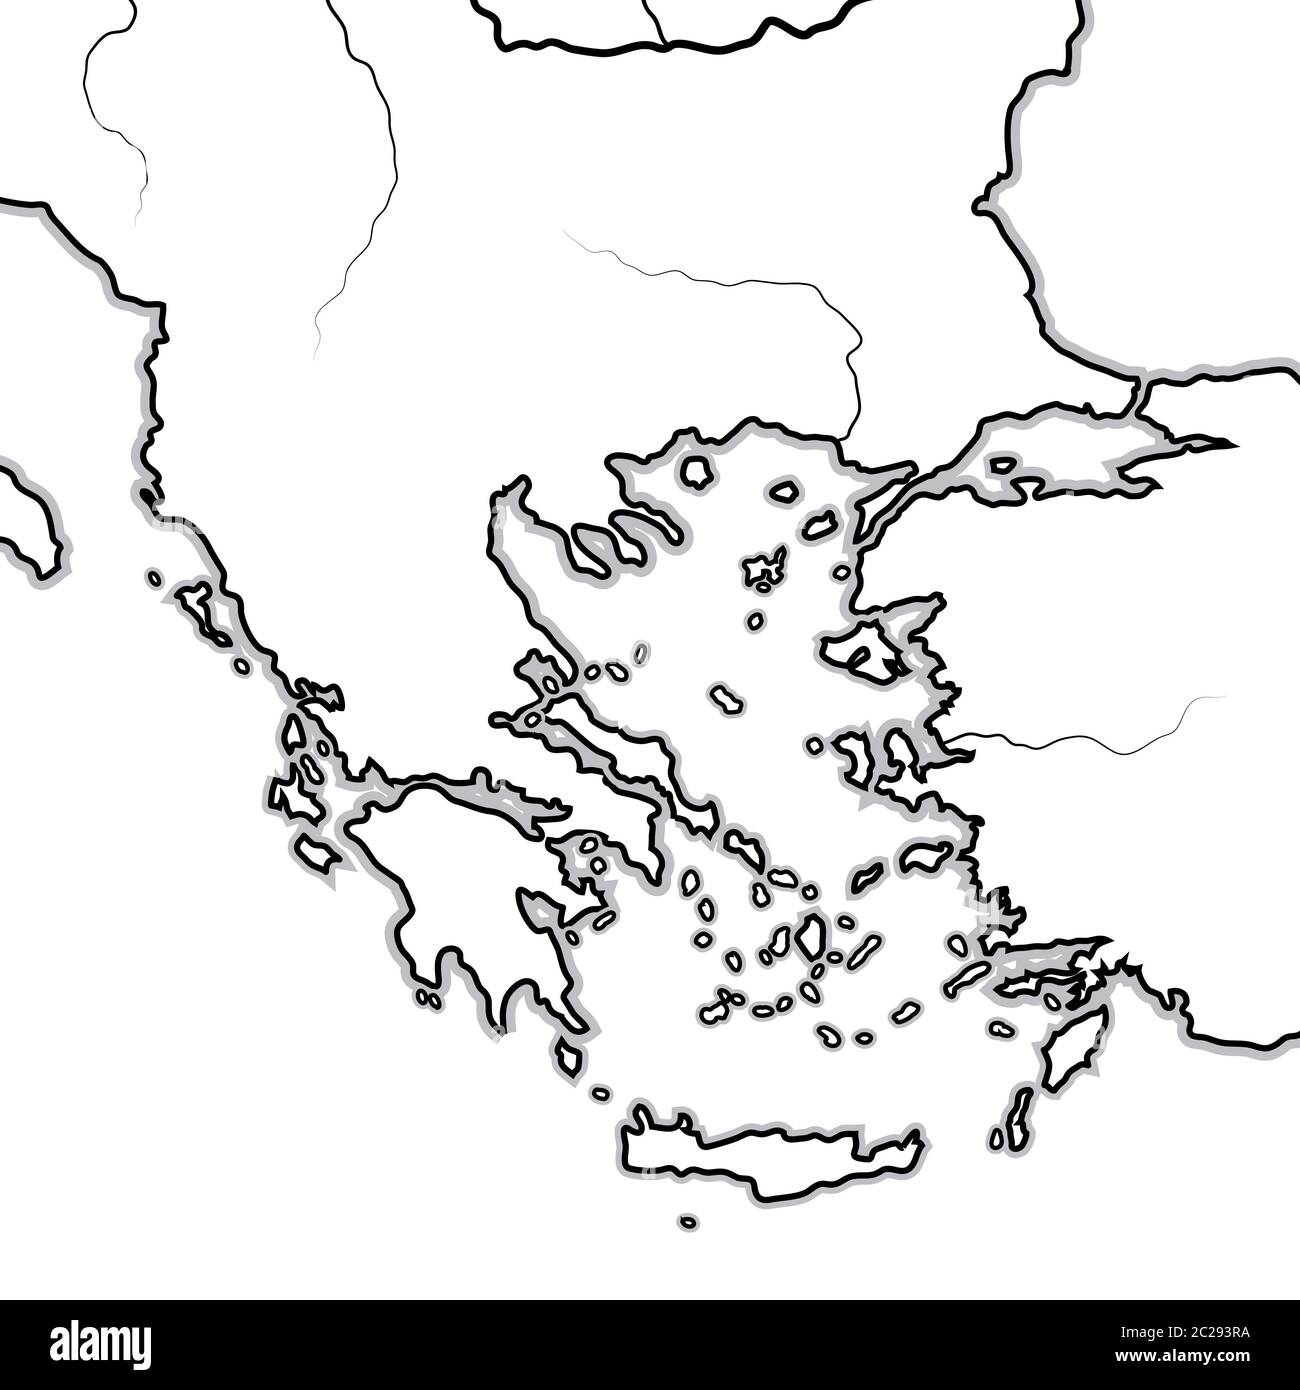 Map of The GREEK Lands: Greece, Peloponnese, Thrace, Macedonia, Balkans, Aegean Sea. Geographic chart. Stock Photo